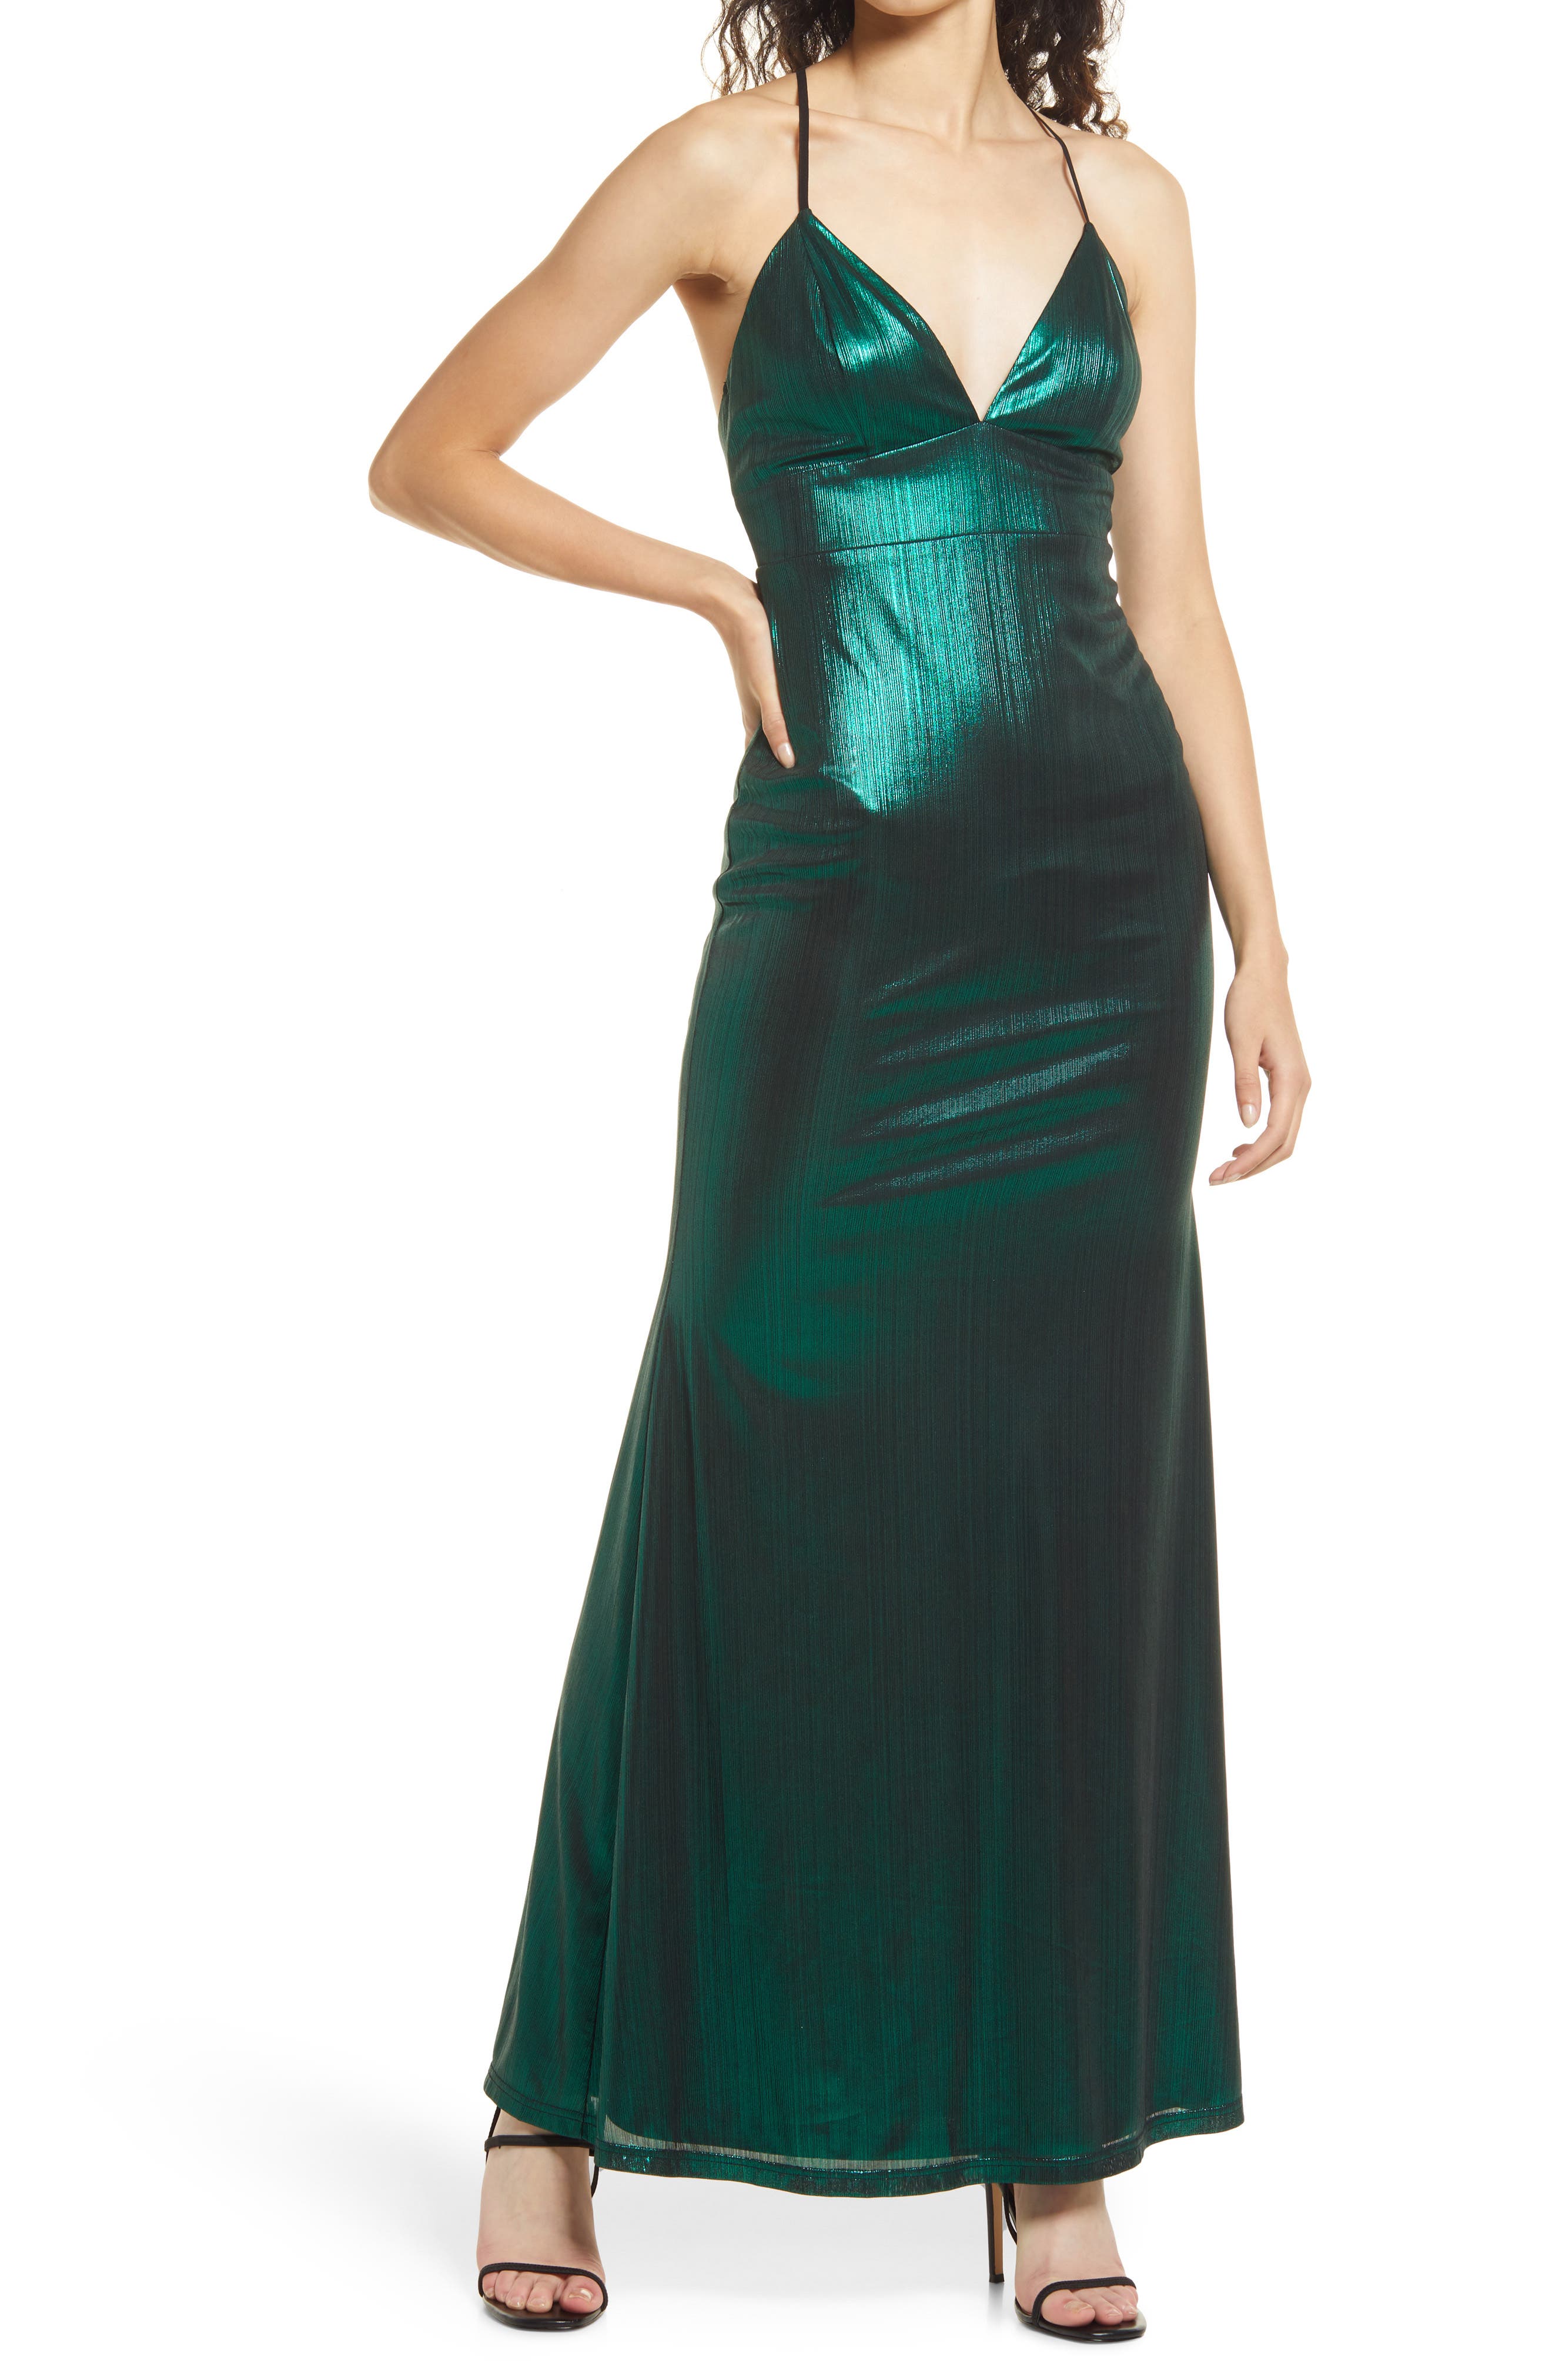 Vintage Gown Big Bow Bridesmaid Prom Emerald Green